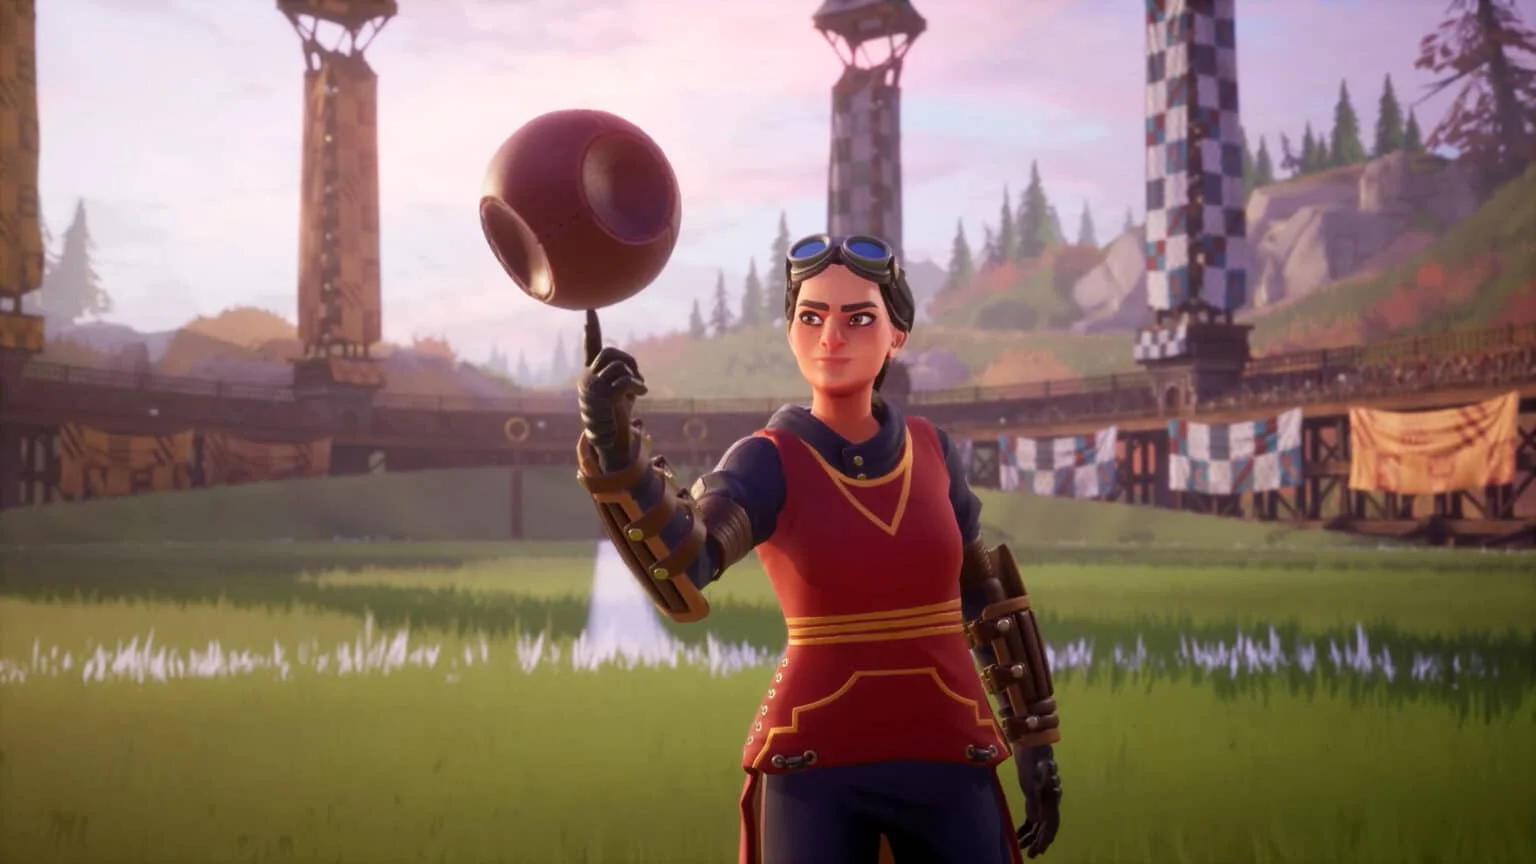 Gameplay video Harry Potter: Quidditch Champions found in a spicy place